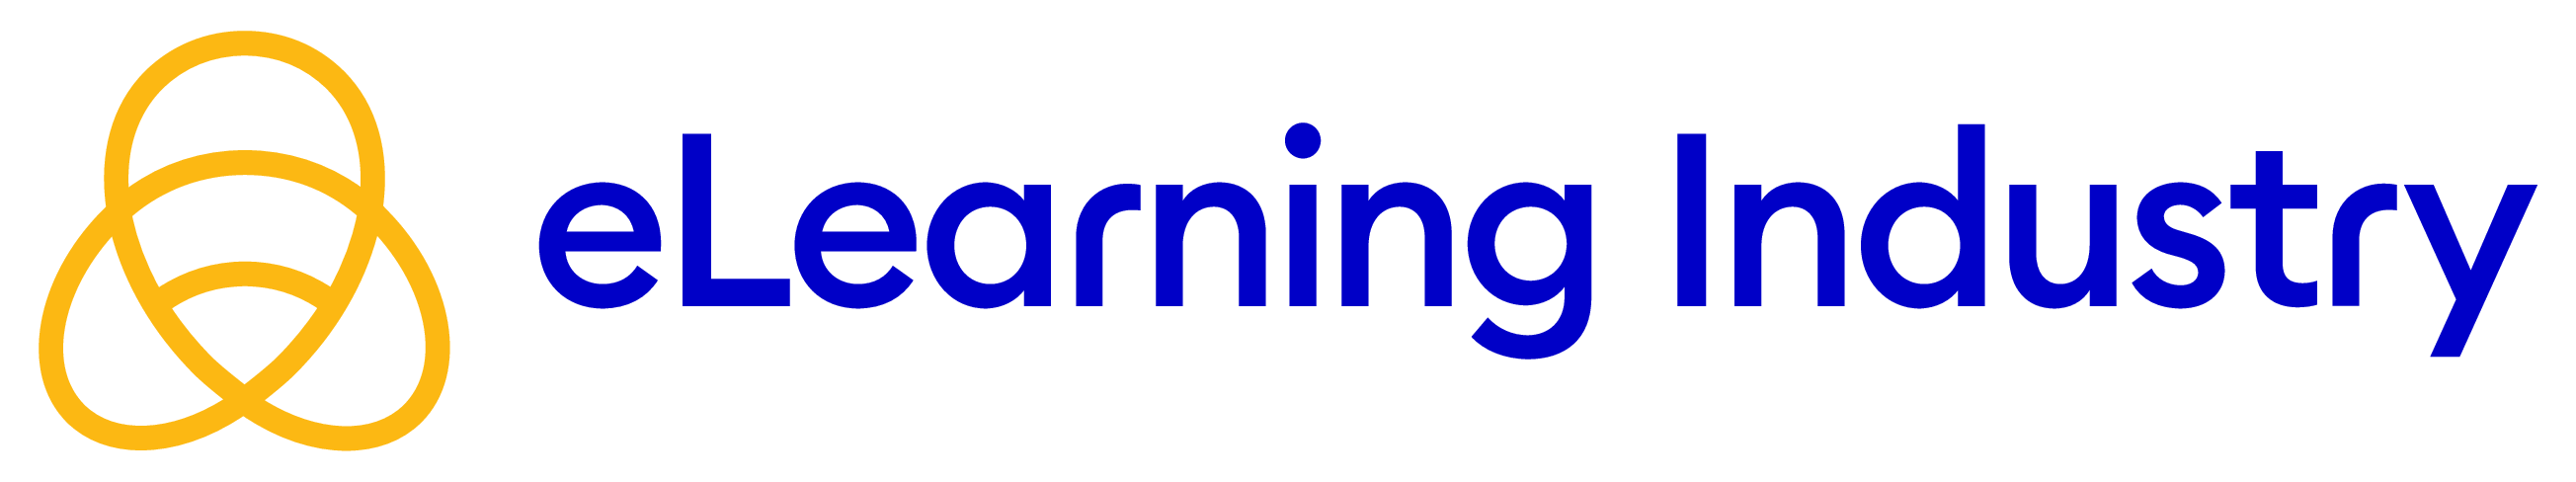 eLearning Industry_primary logo (2)